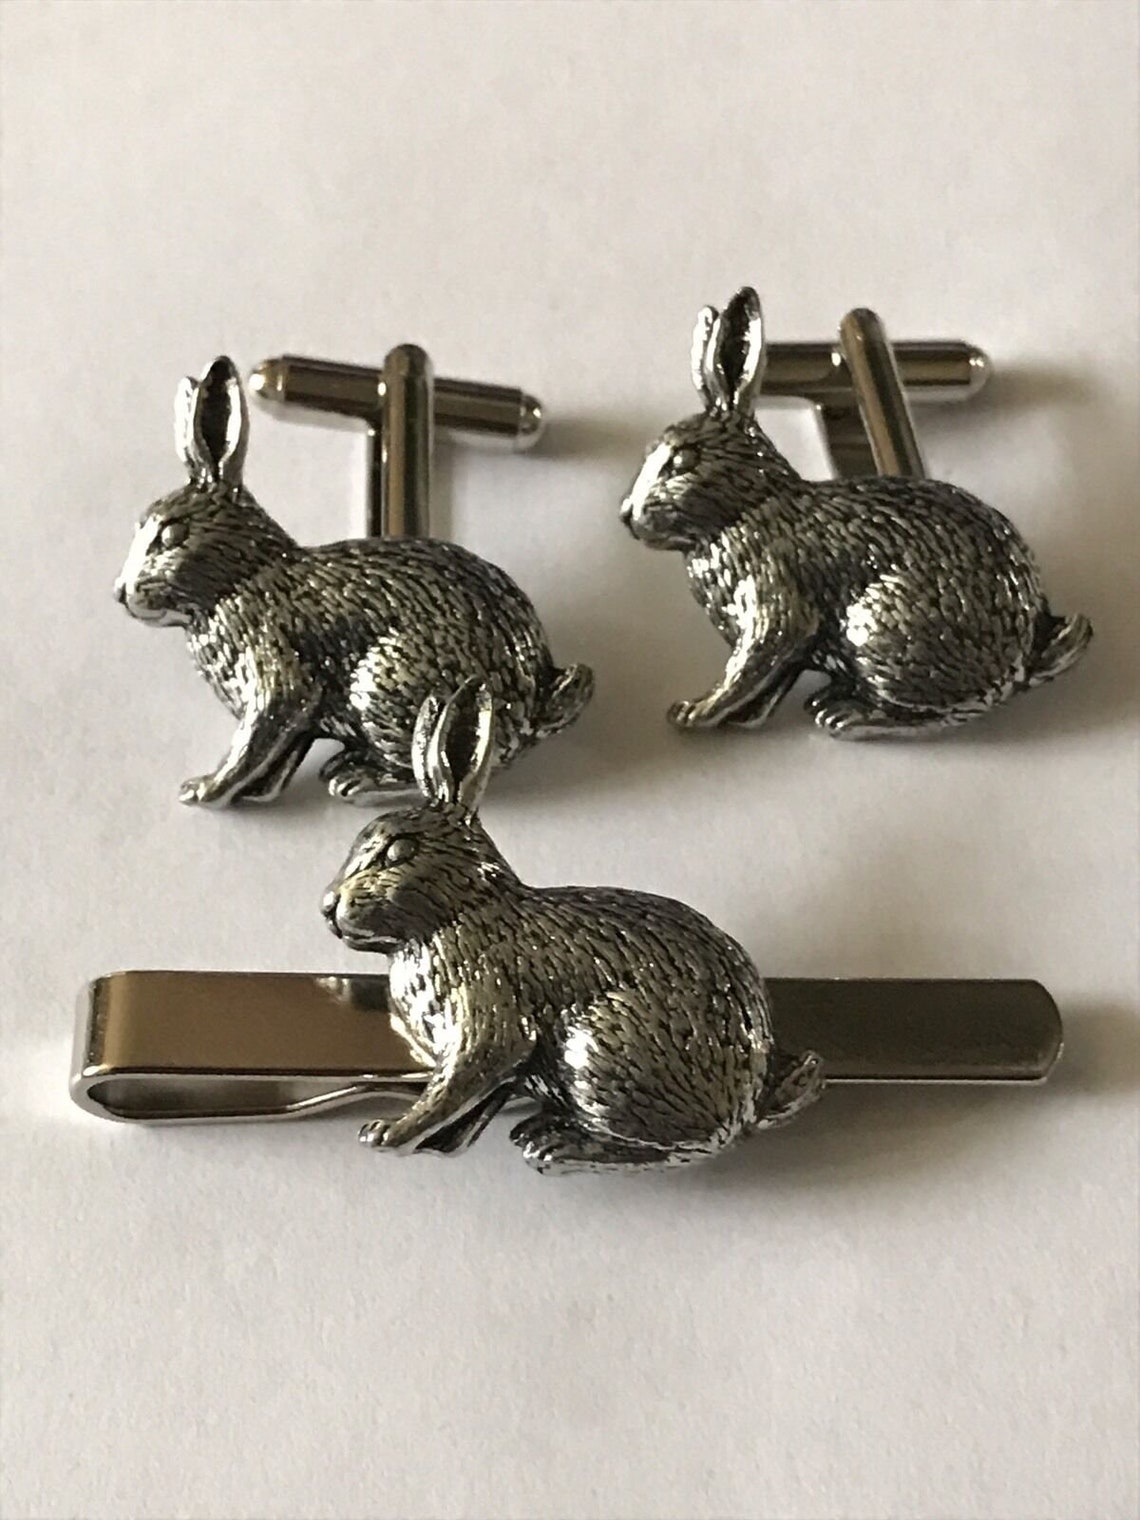 Rabbit Made From Fine English Pewter Cuff Link or Tie Slide or - Etsy